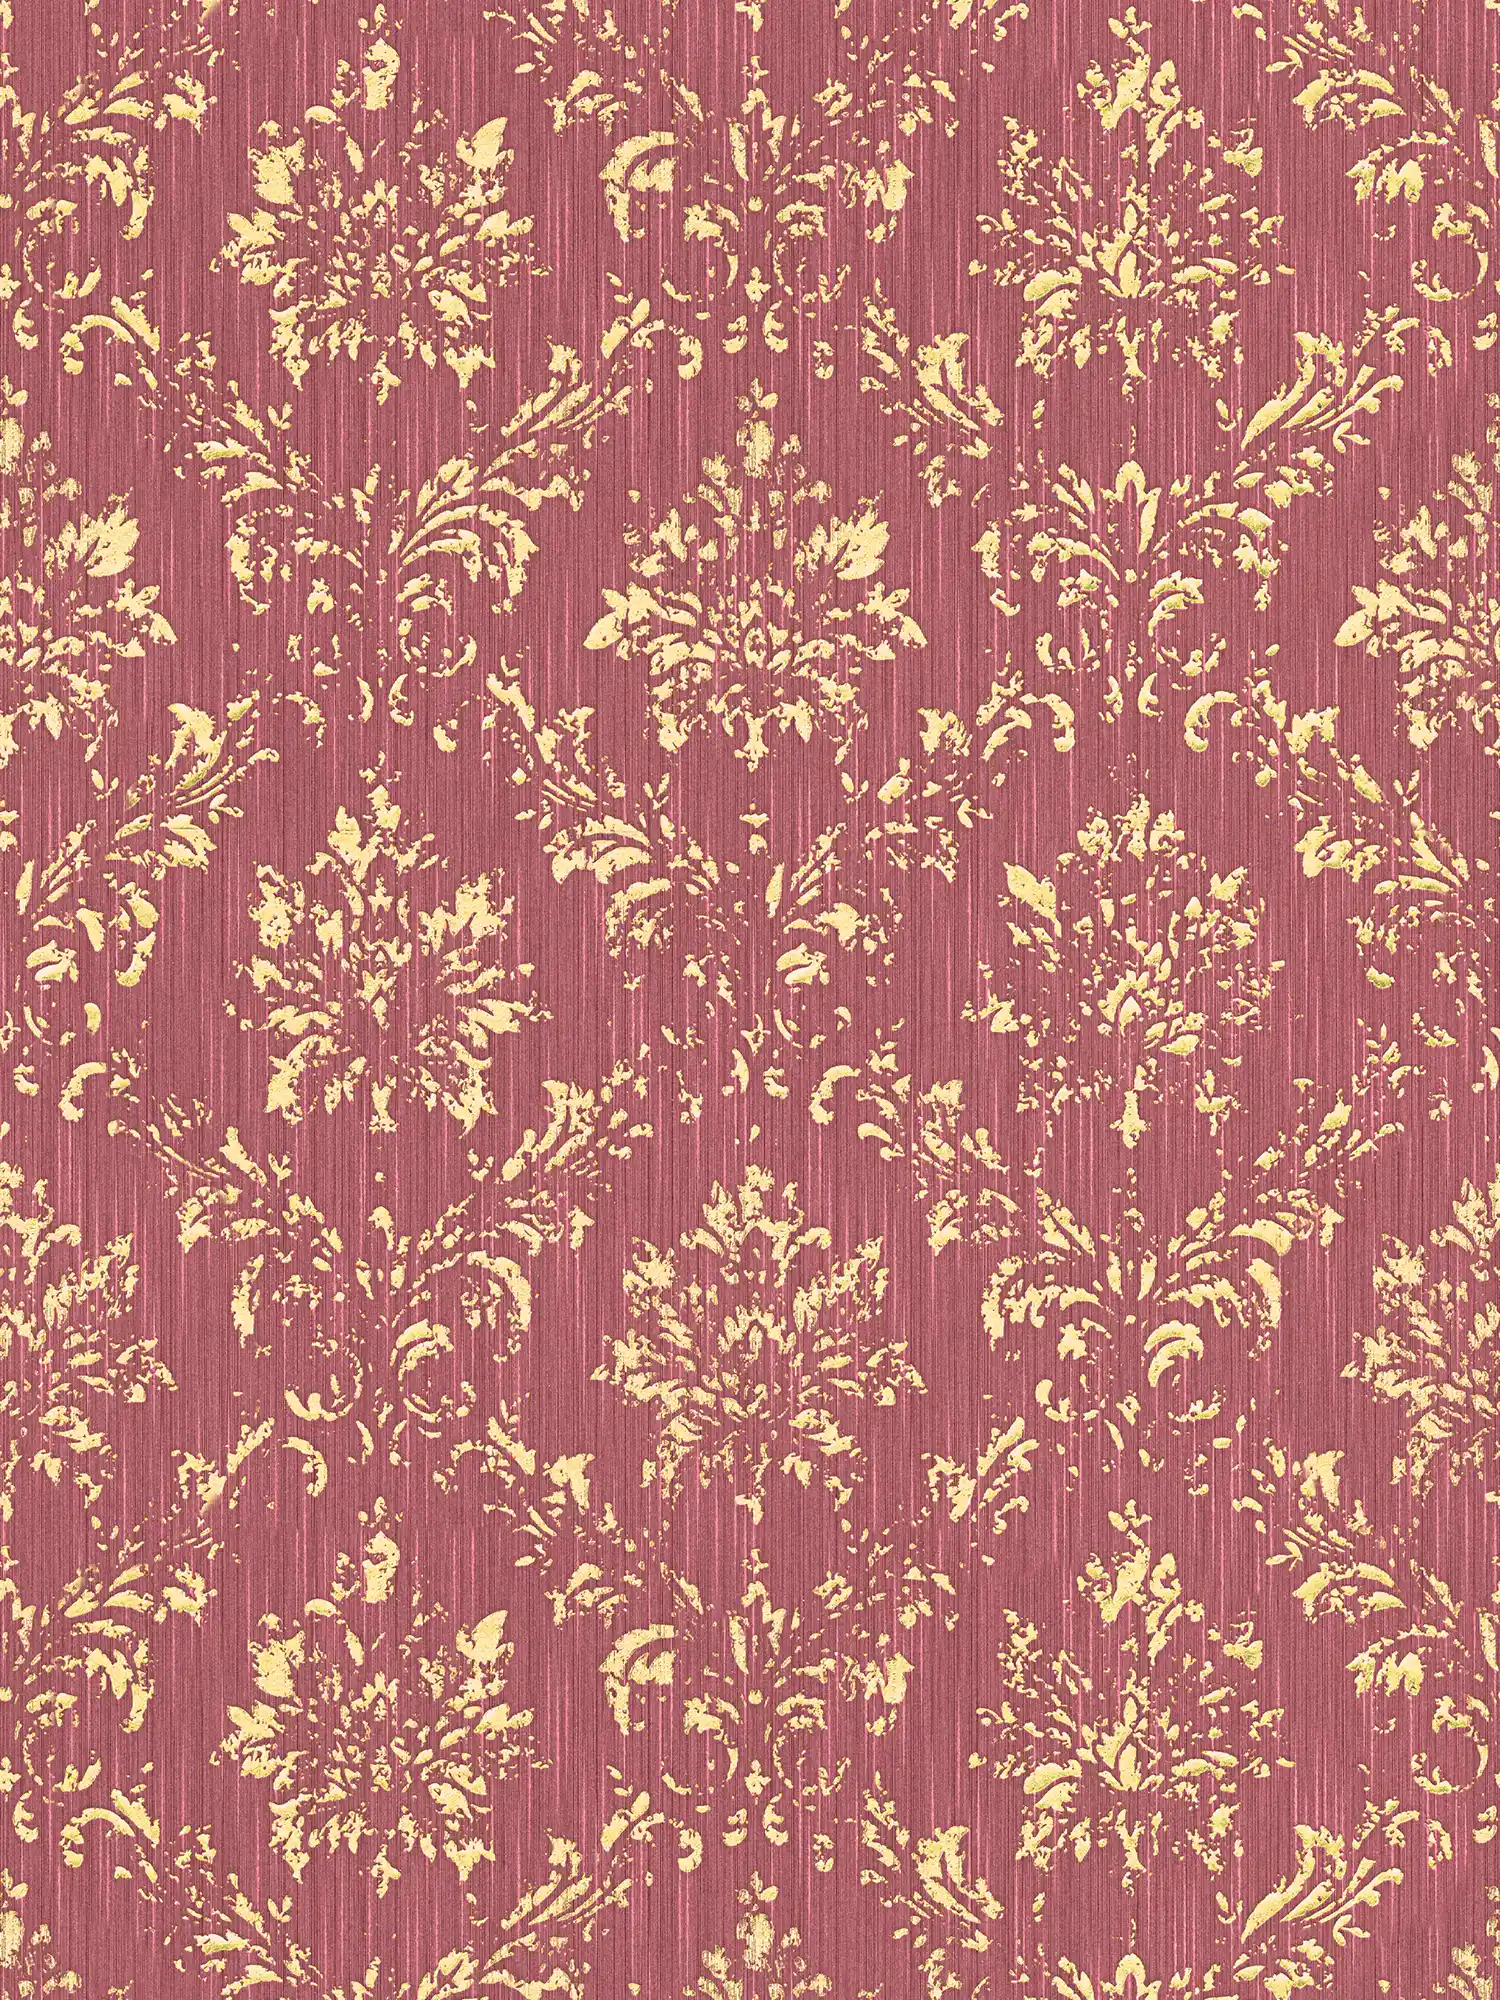 Wallpaper with gold ornaments in used look - red, gold
